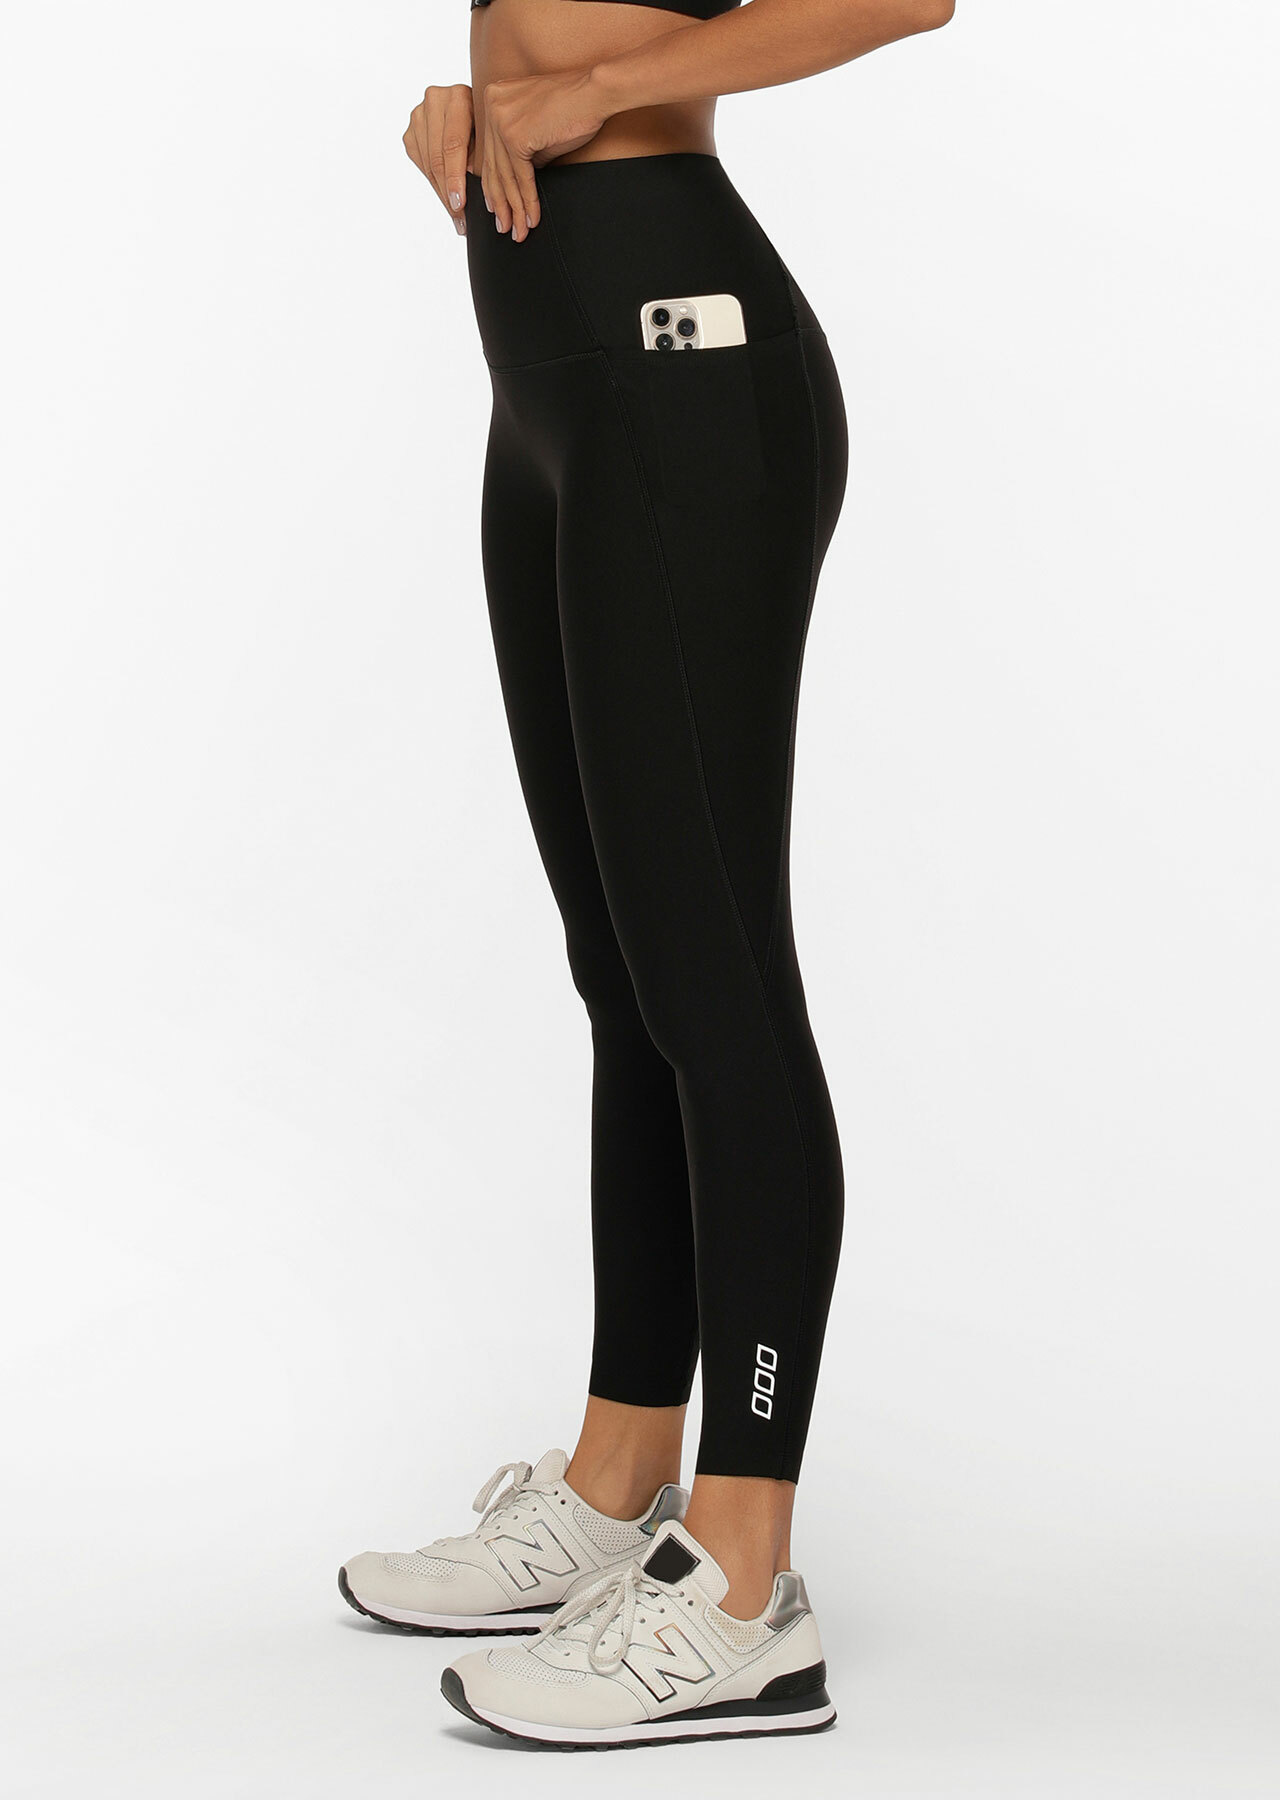 Find Your Perfect Fit, Best Women's Ankle-Length Leggings